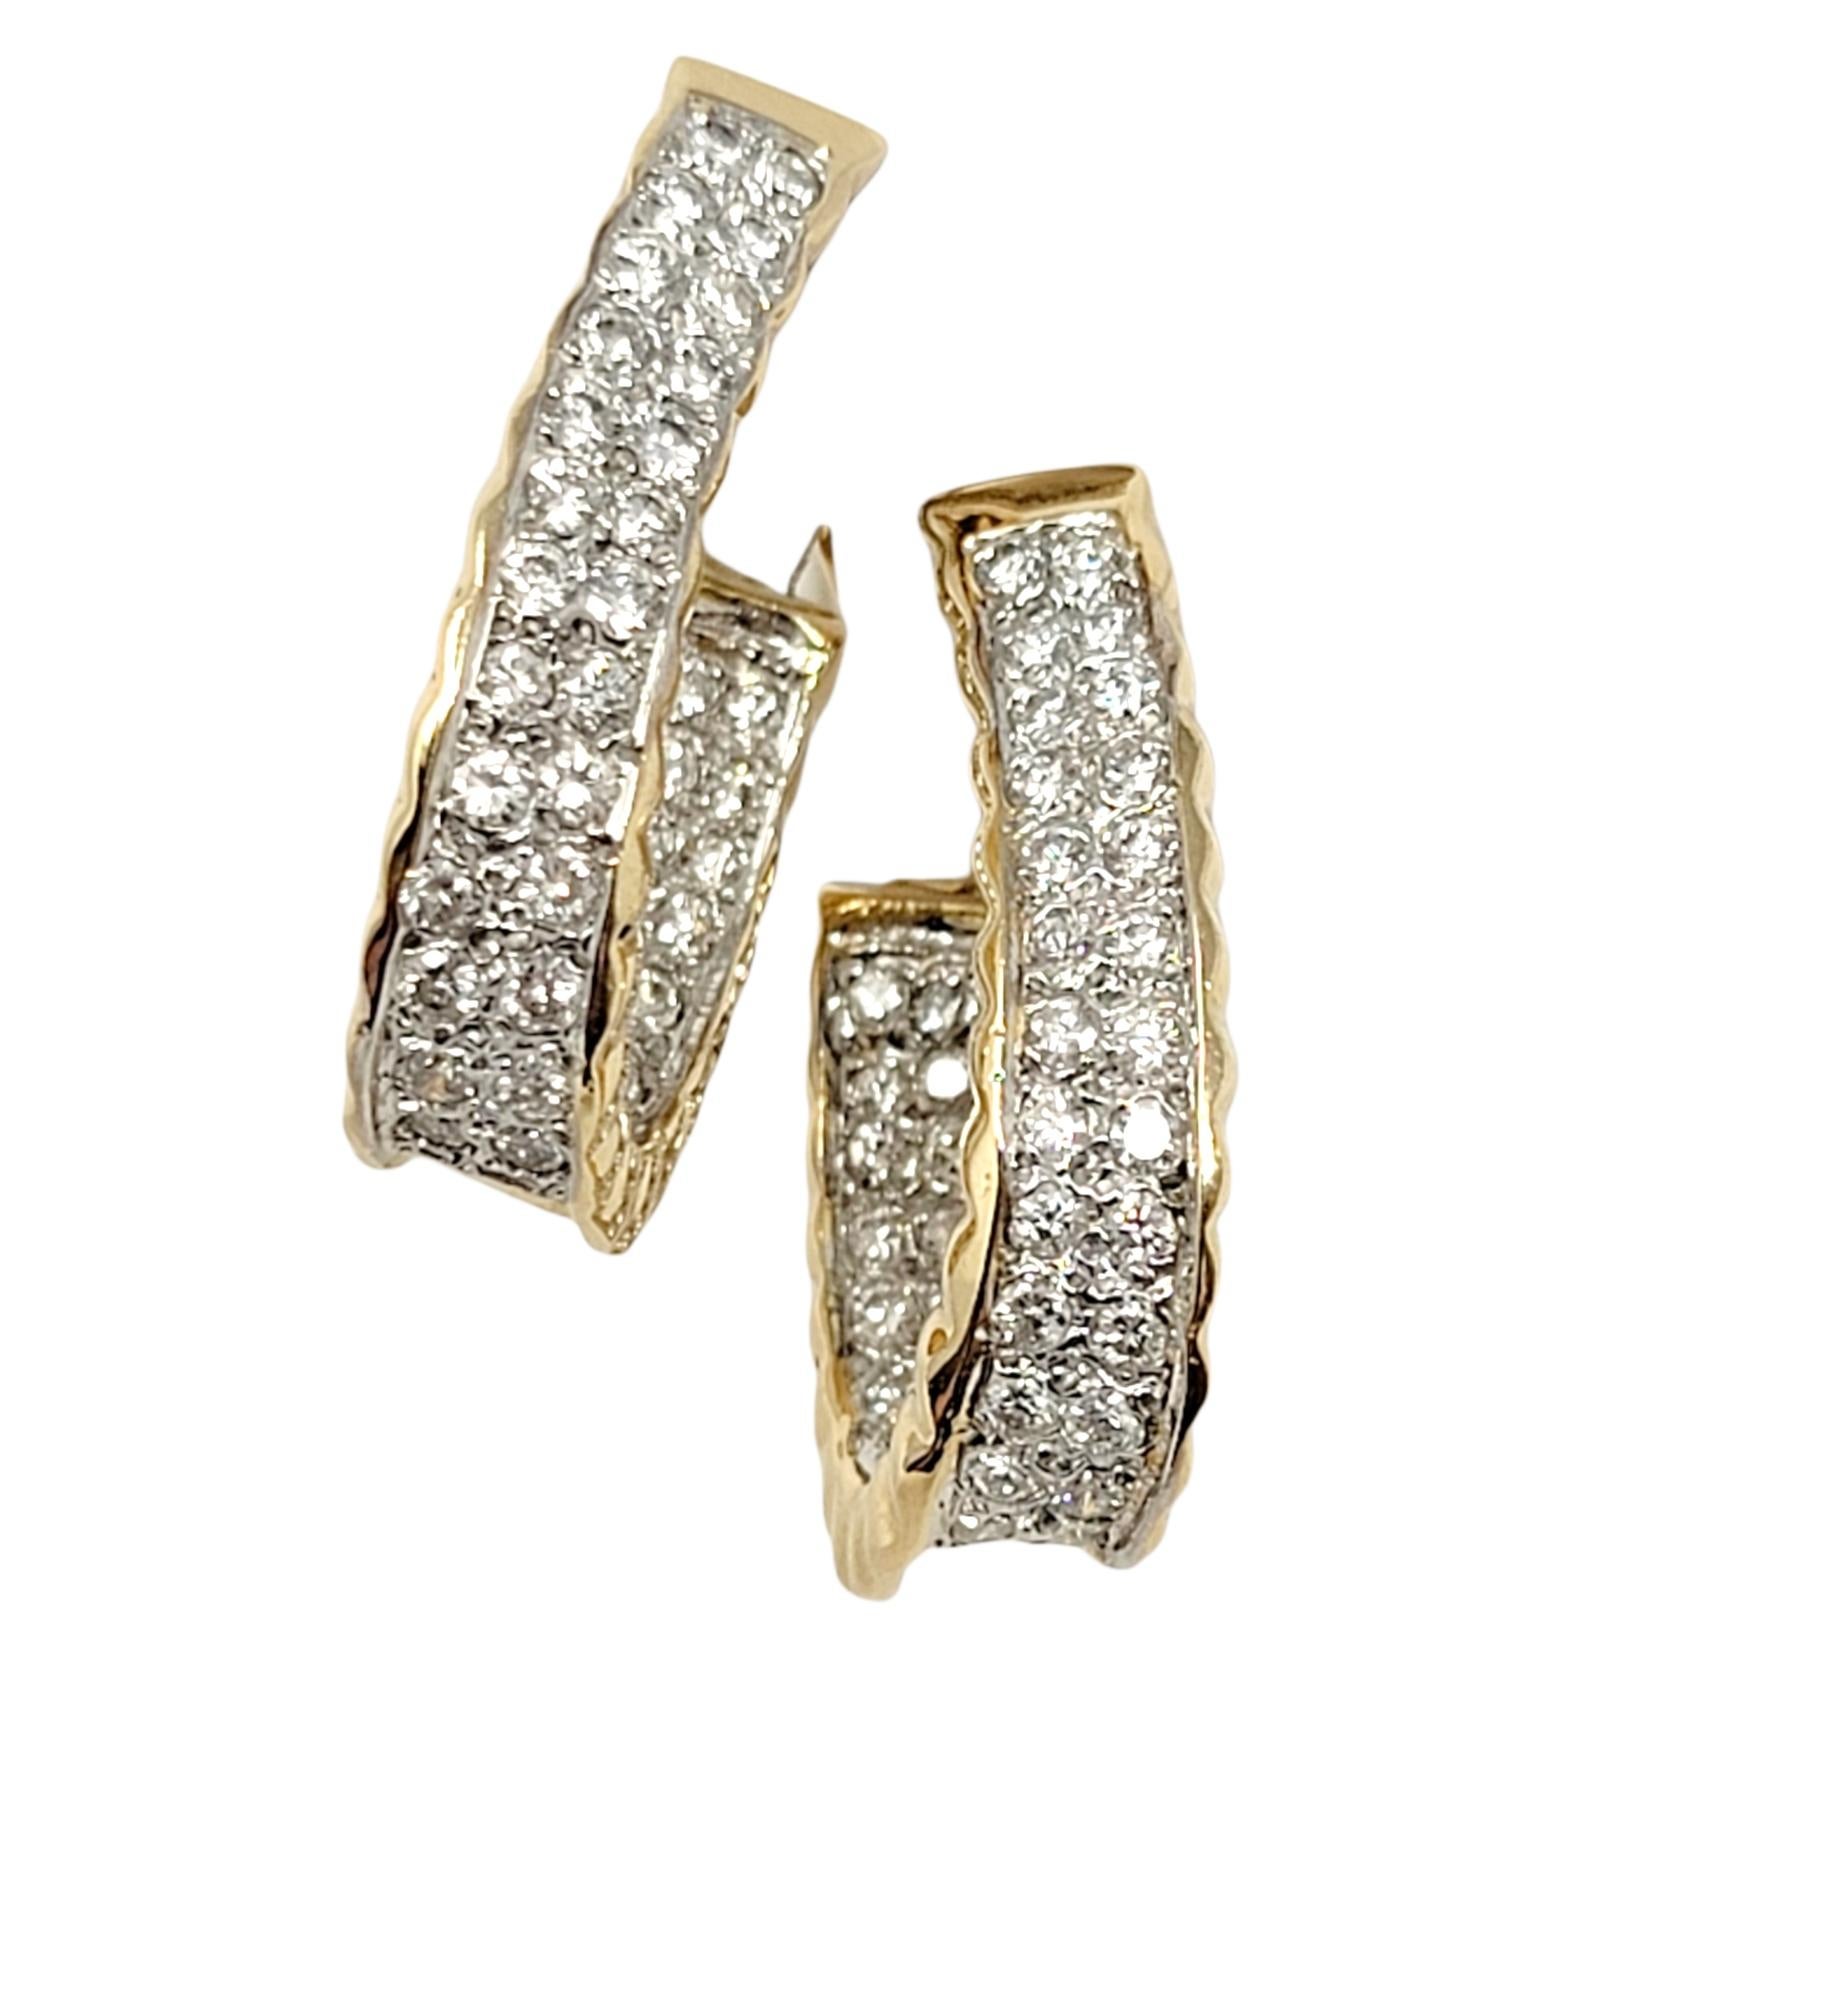 These beautiful diamond encrusted half hoop earrings shimmer and shine on the ear and offer incredible sparkle! The icy white stones really pop against the textured yellow gold setting, while the unique inside/outside setting allows the light to hit